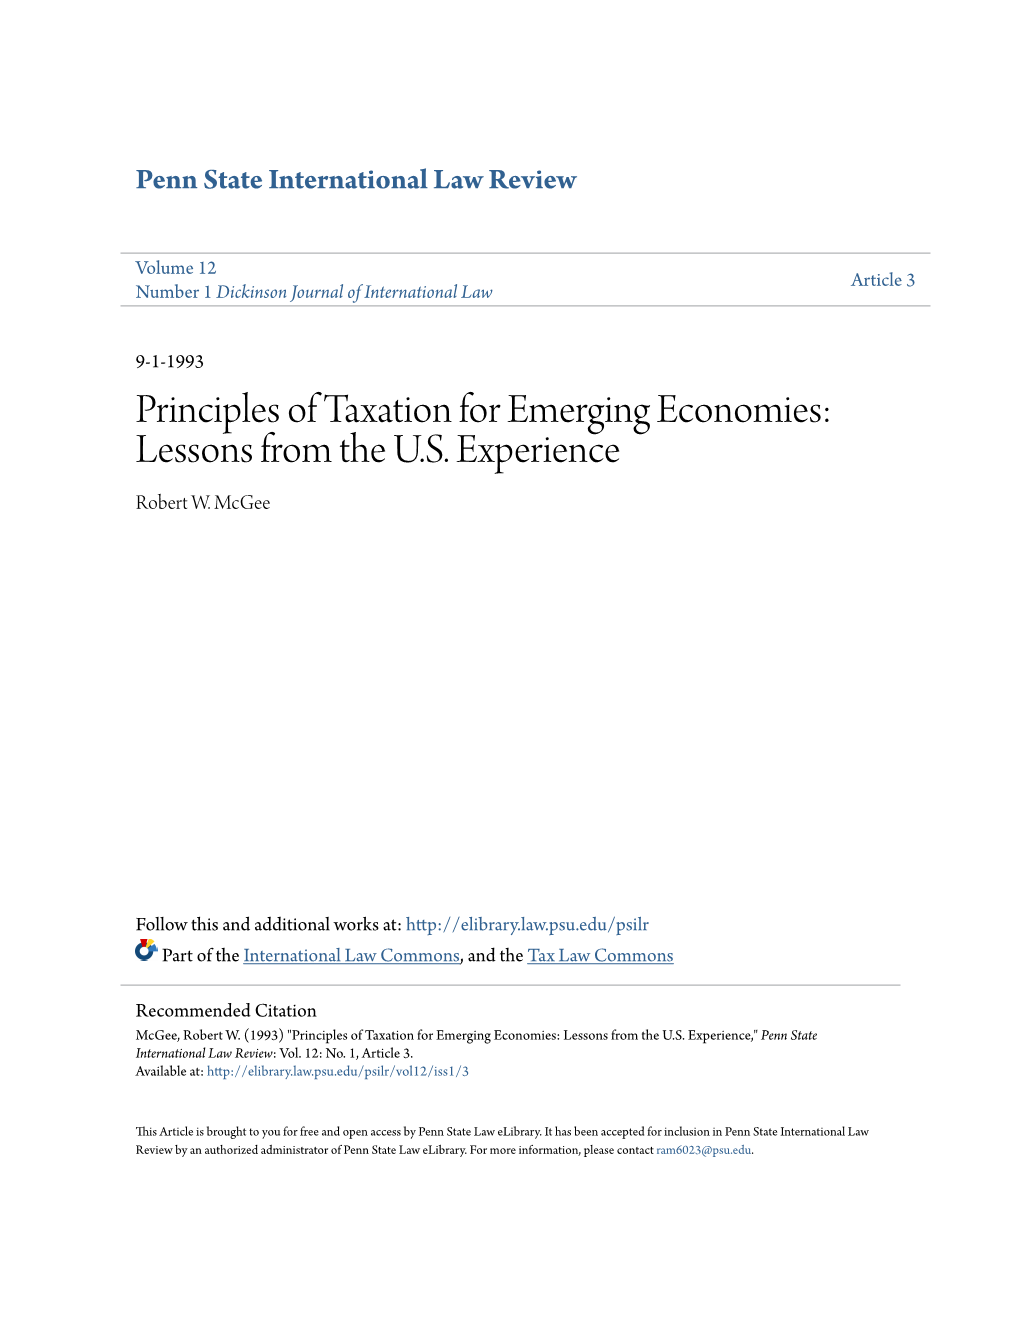 Principles of Taxation for Emerging Economies: Lessons from the U.S